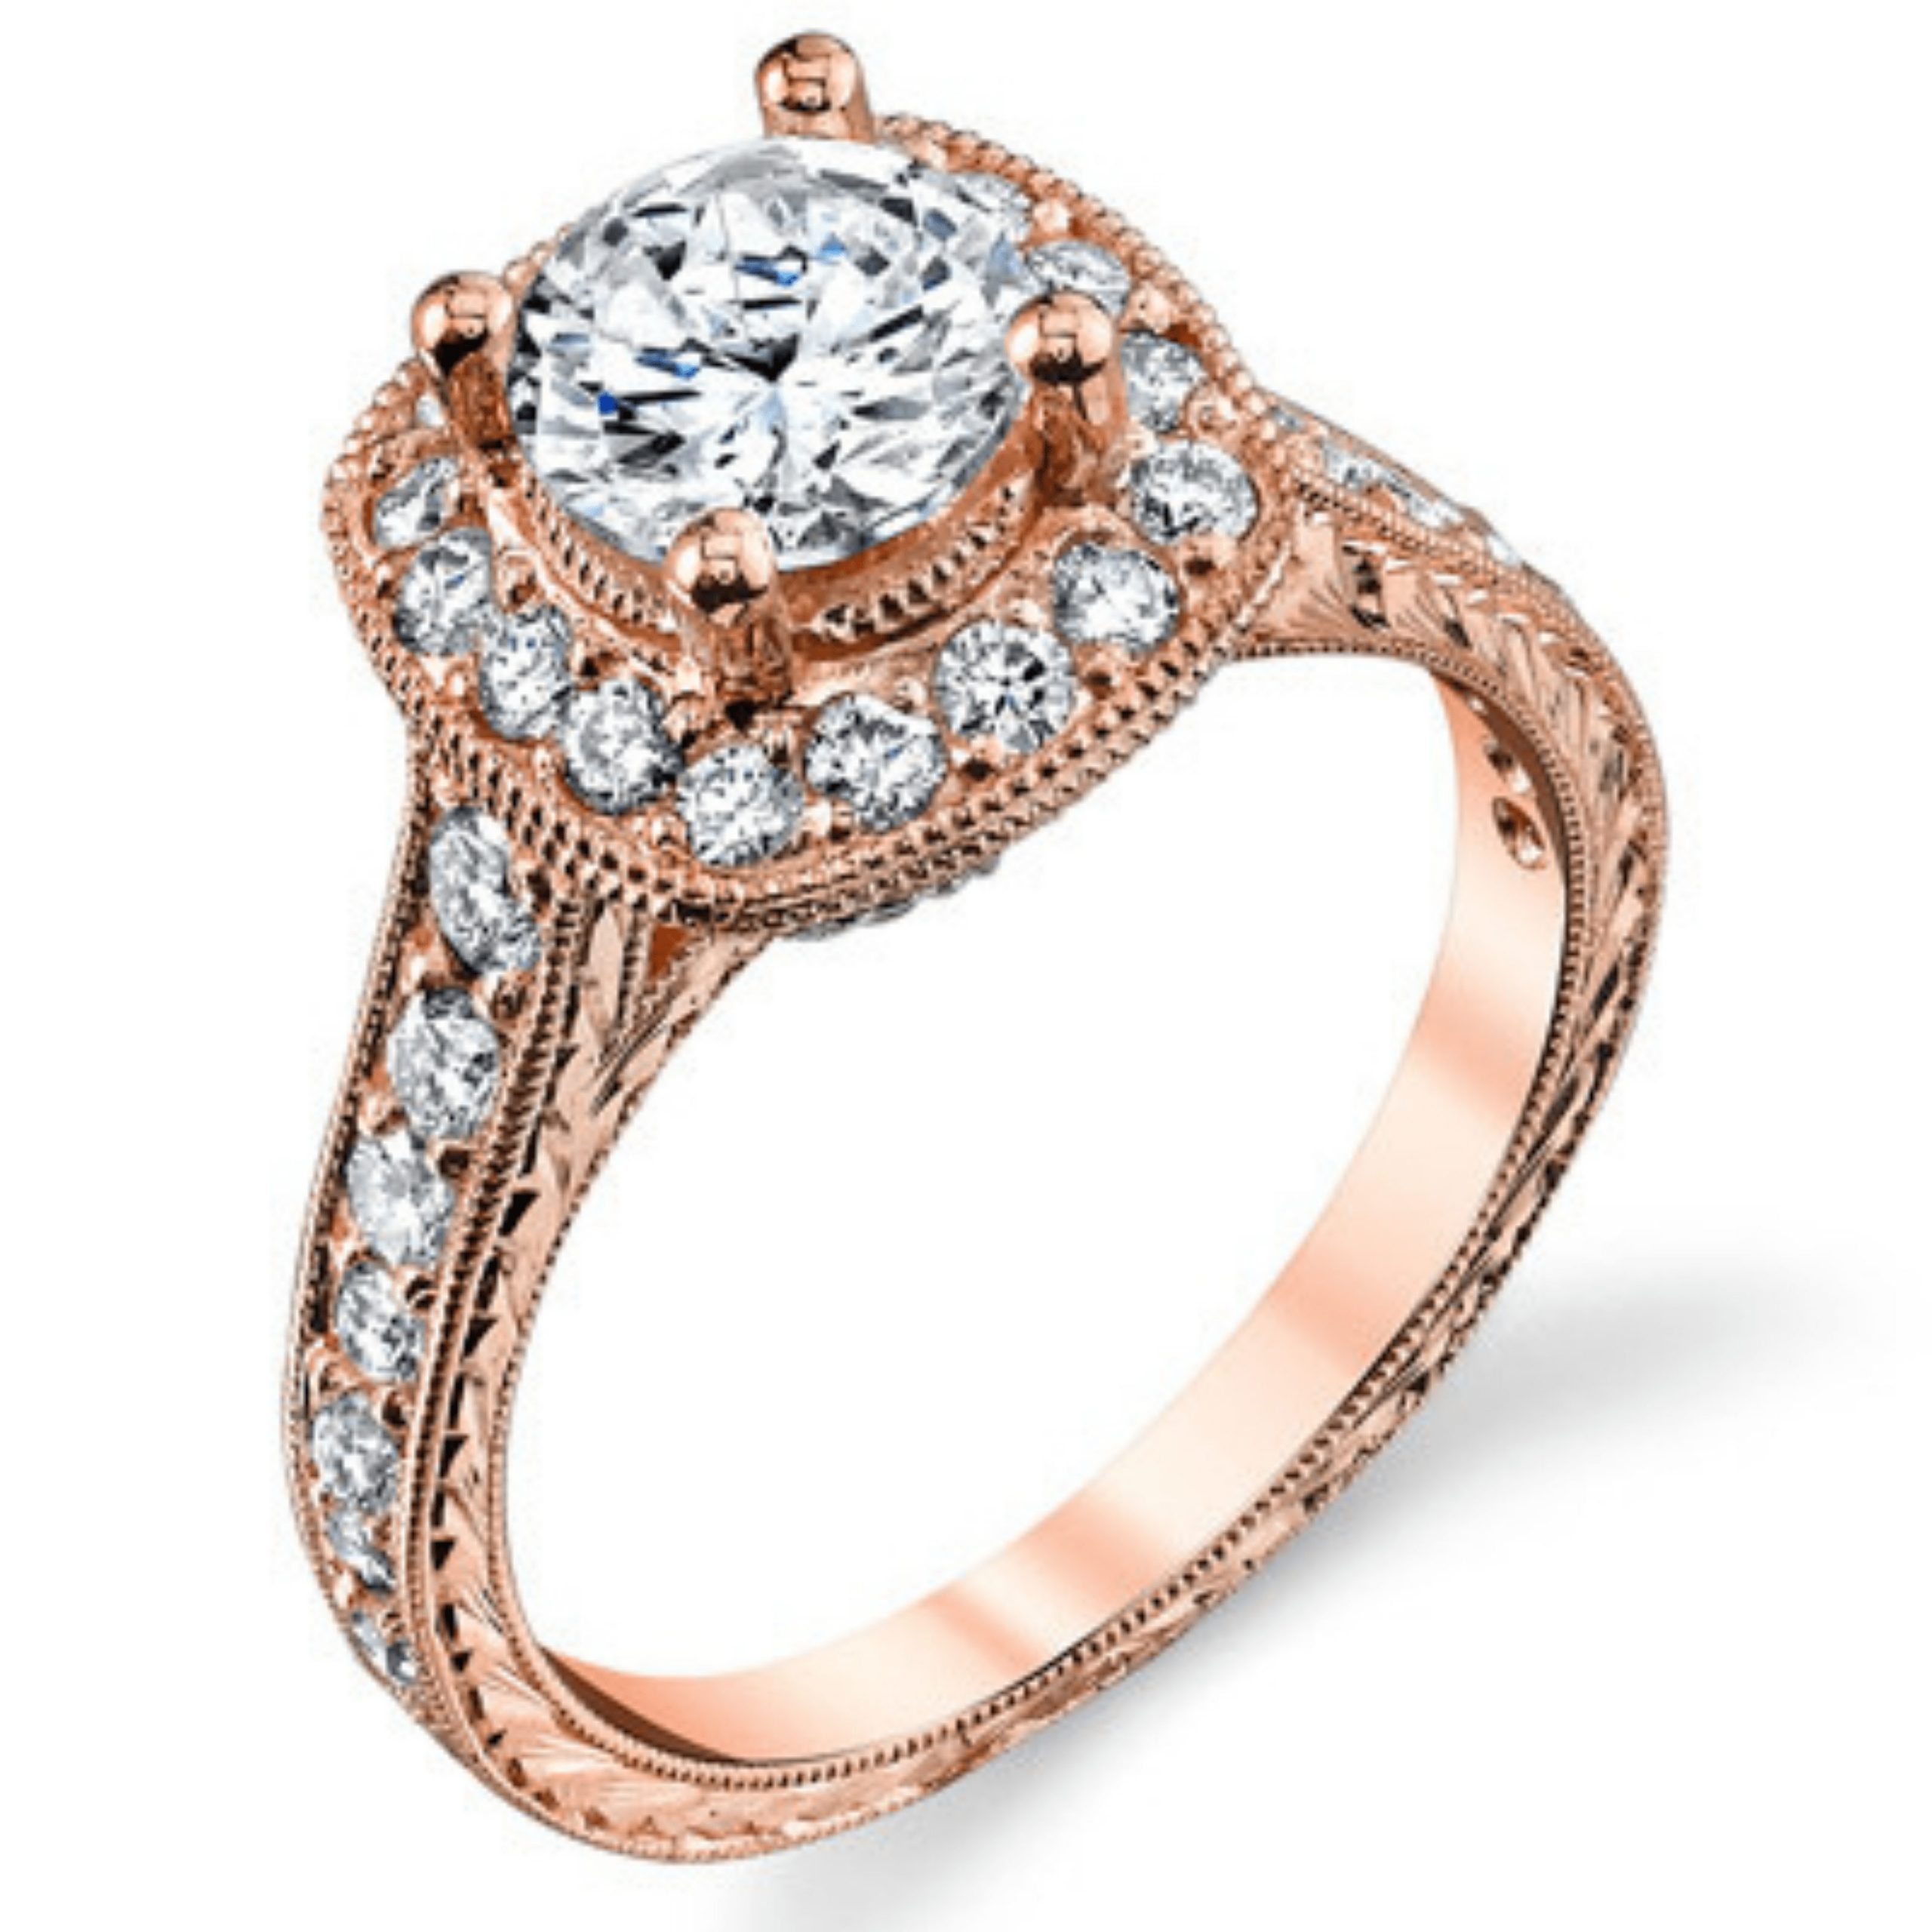 Rose Gold Diamond Halo Engagement Ring - Front View2